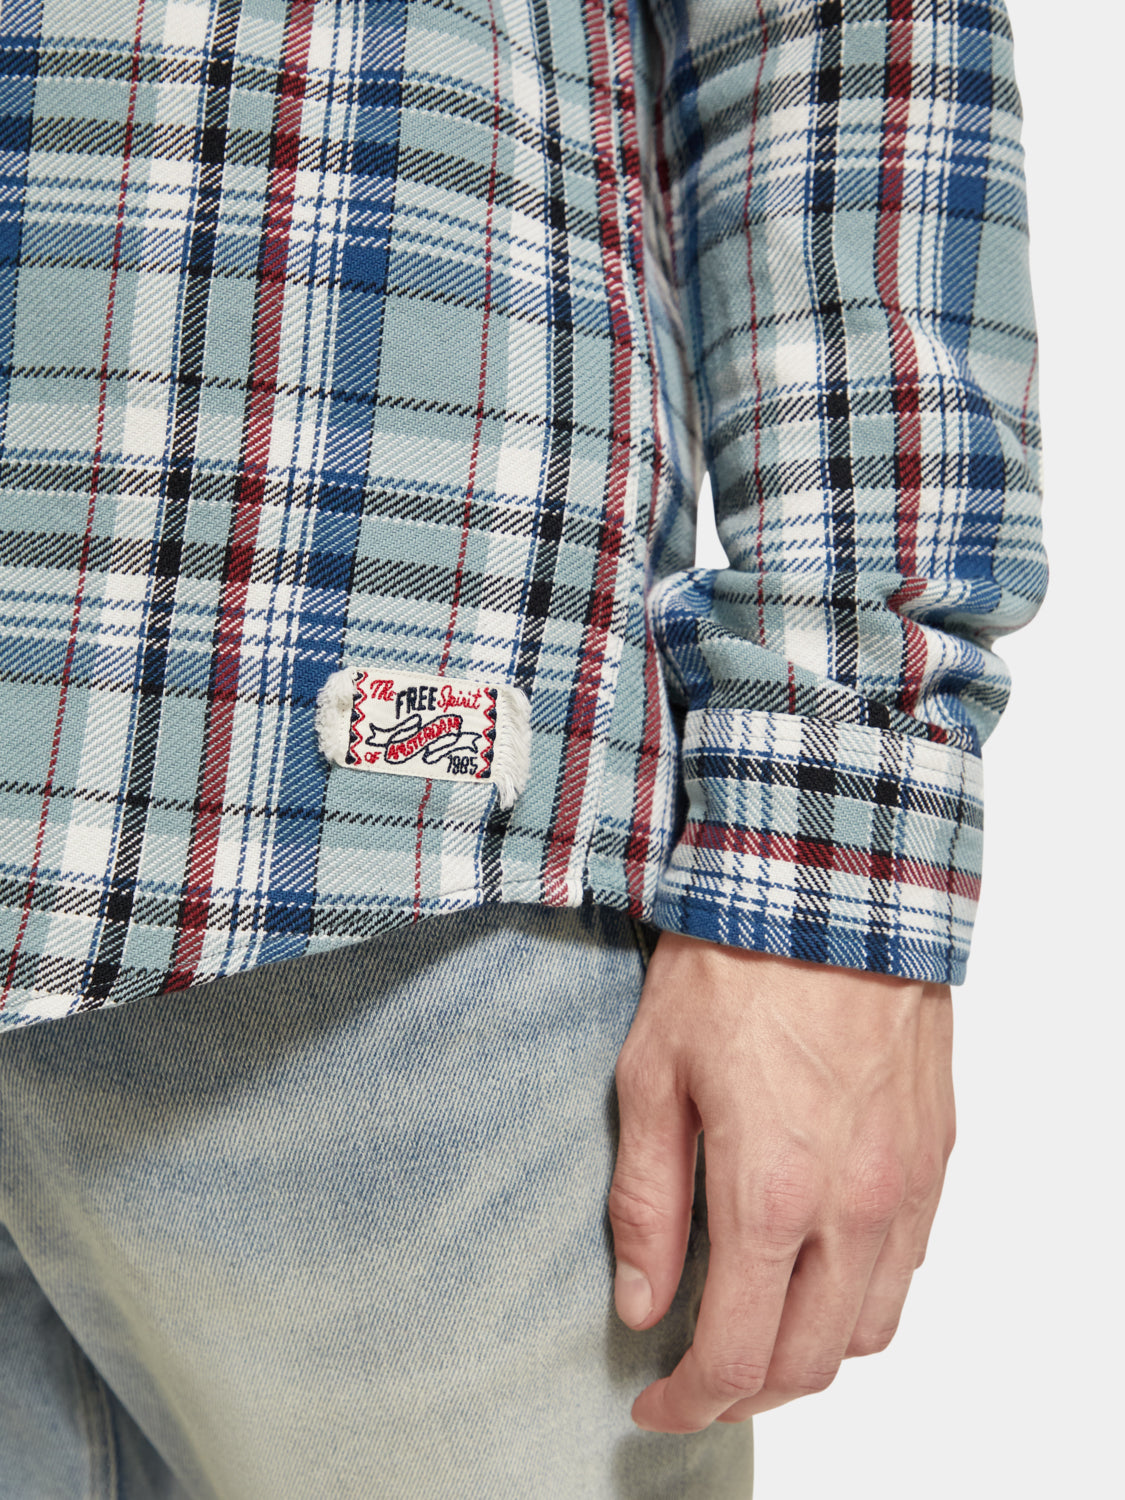 Flannel check shirt - Blue Red Check